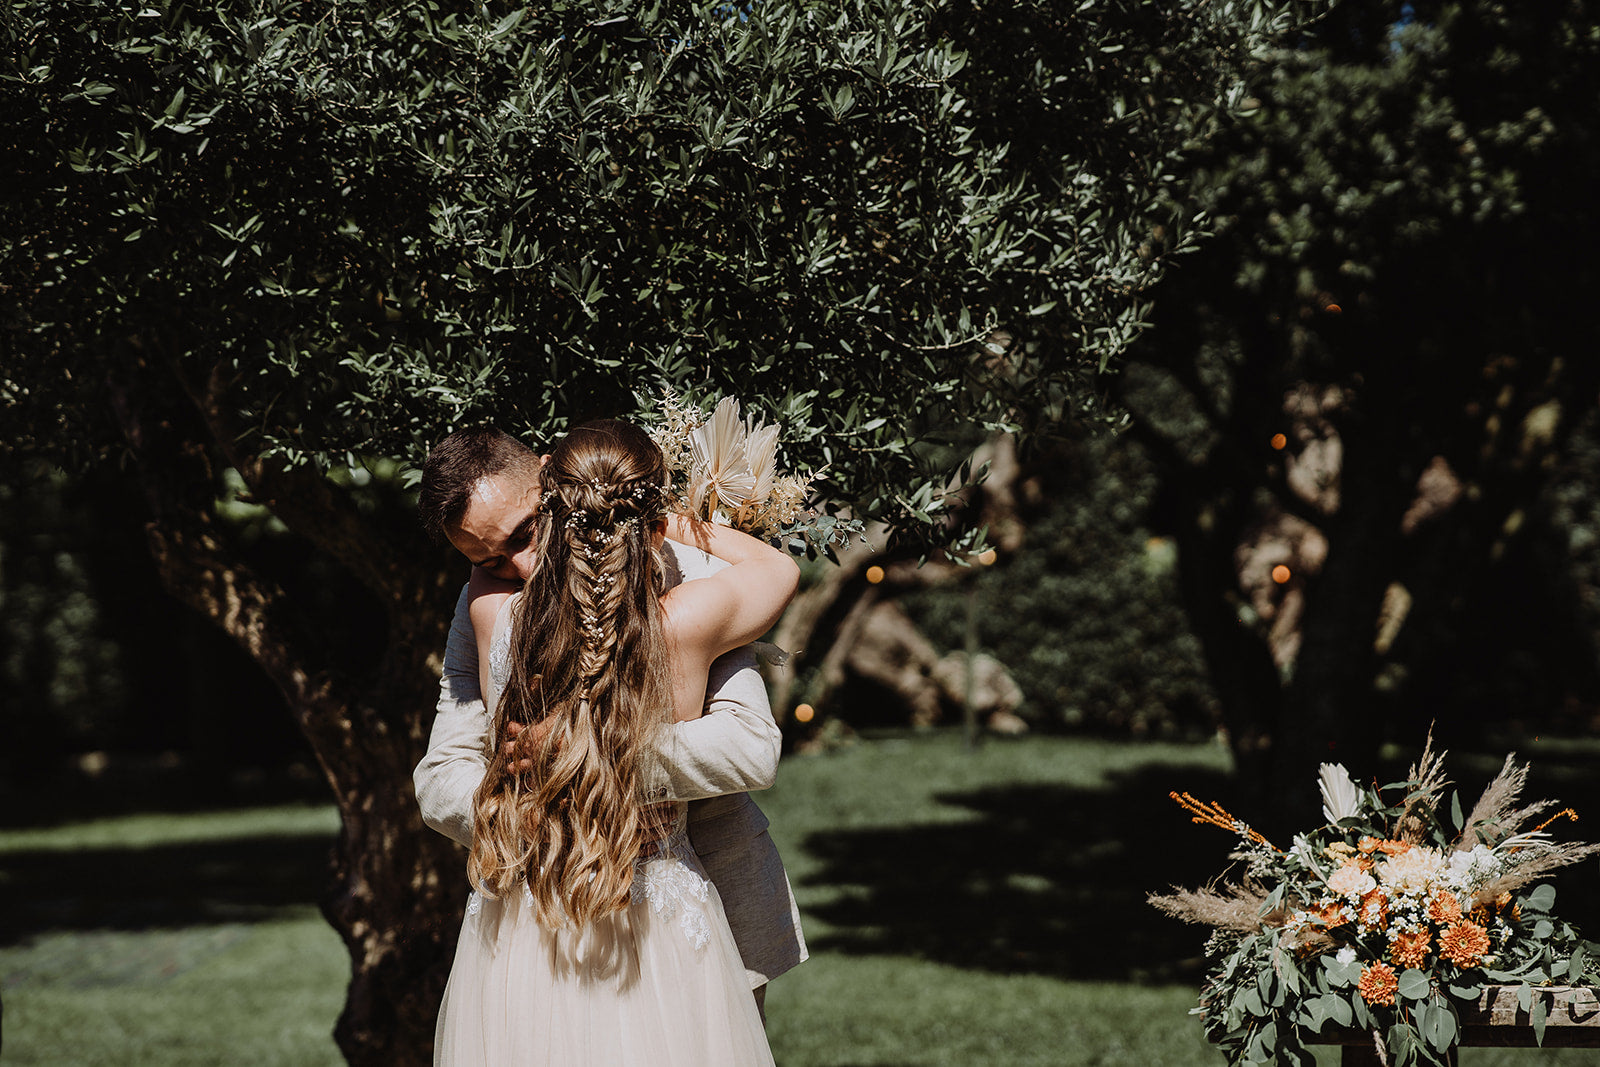 Under the trees the Bride and Groom embrace. The Bride's plaited hair is seen trailing beautifully, whilst she holds her flowers with arms wrapped around her Husband.